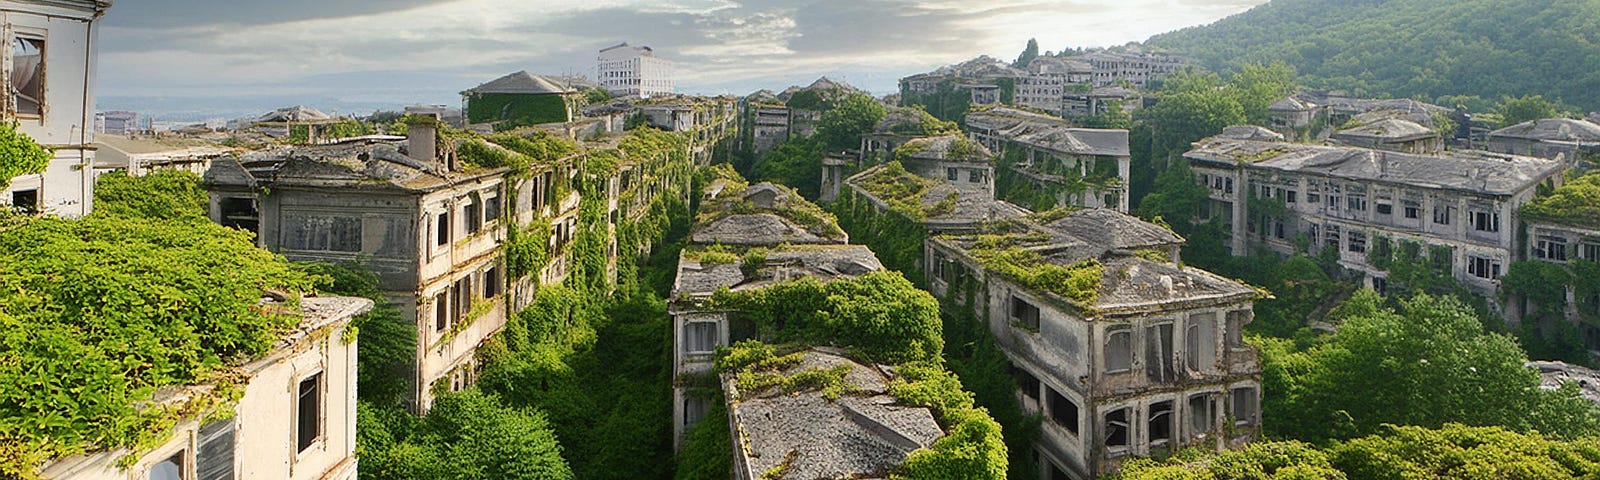 An AI created image of a city taken over by plants